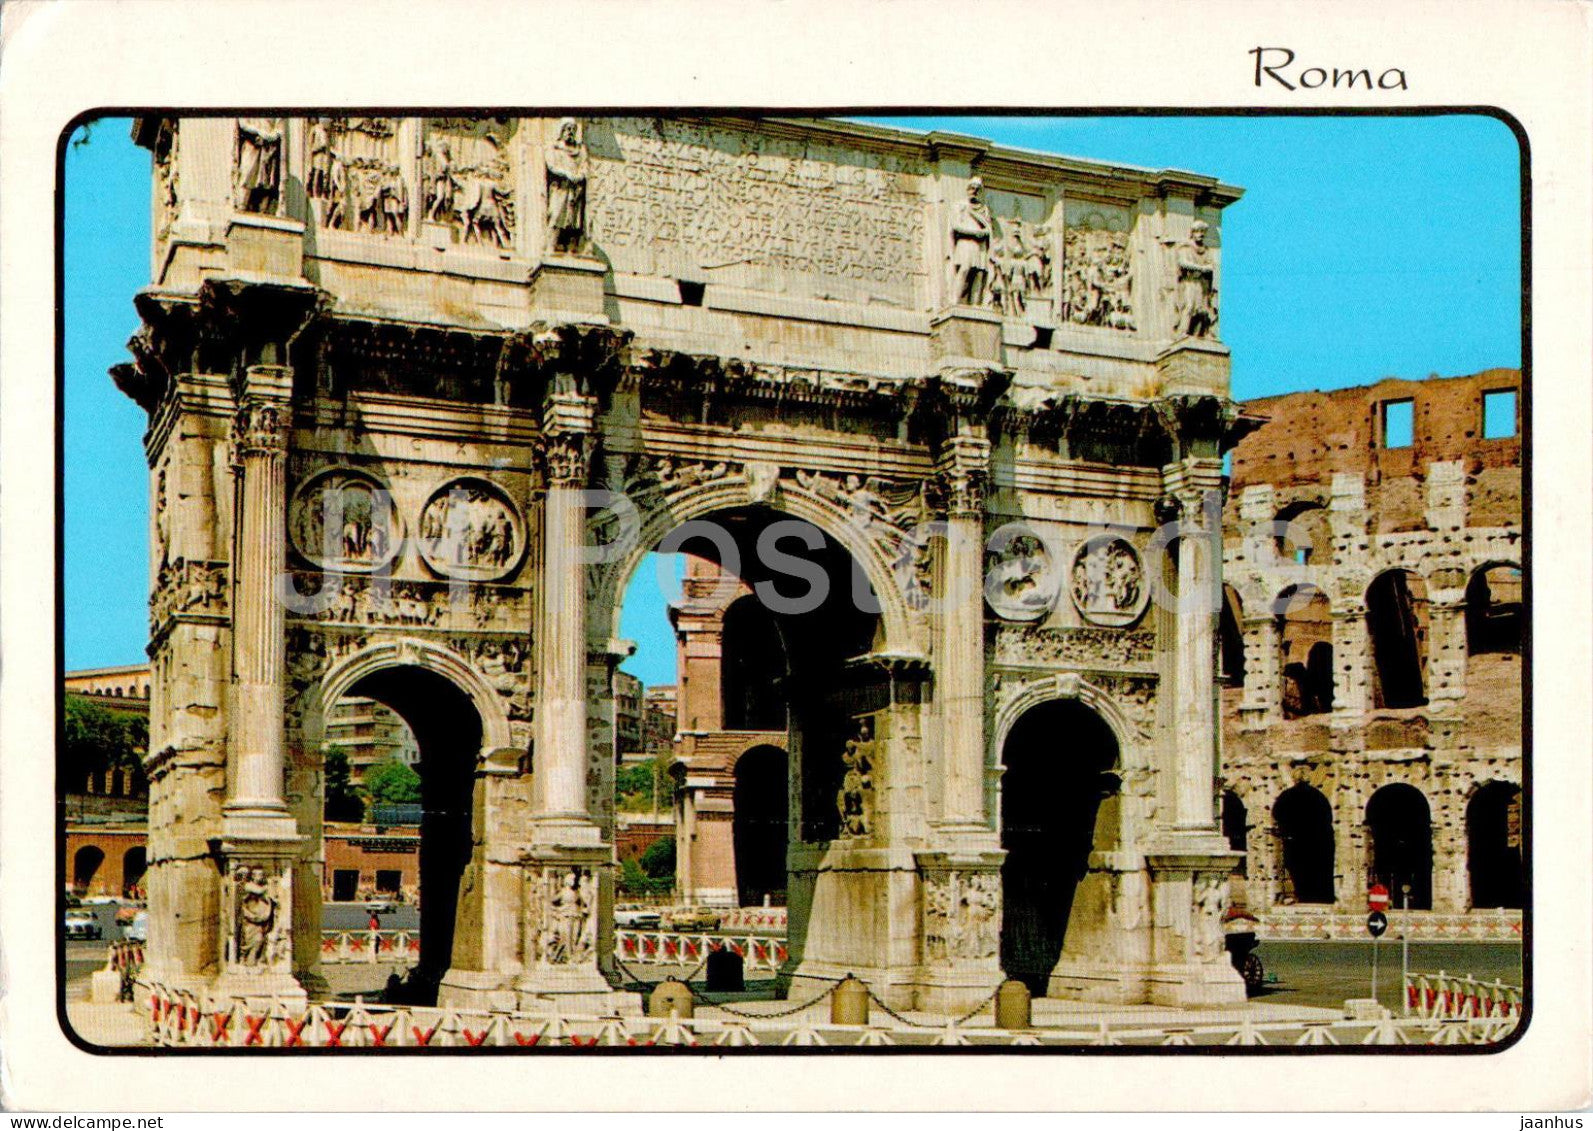 Roma - Rome - Arco di Constantino - Contantine's Arch - ancient world - Italy - used - JH Postcards